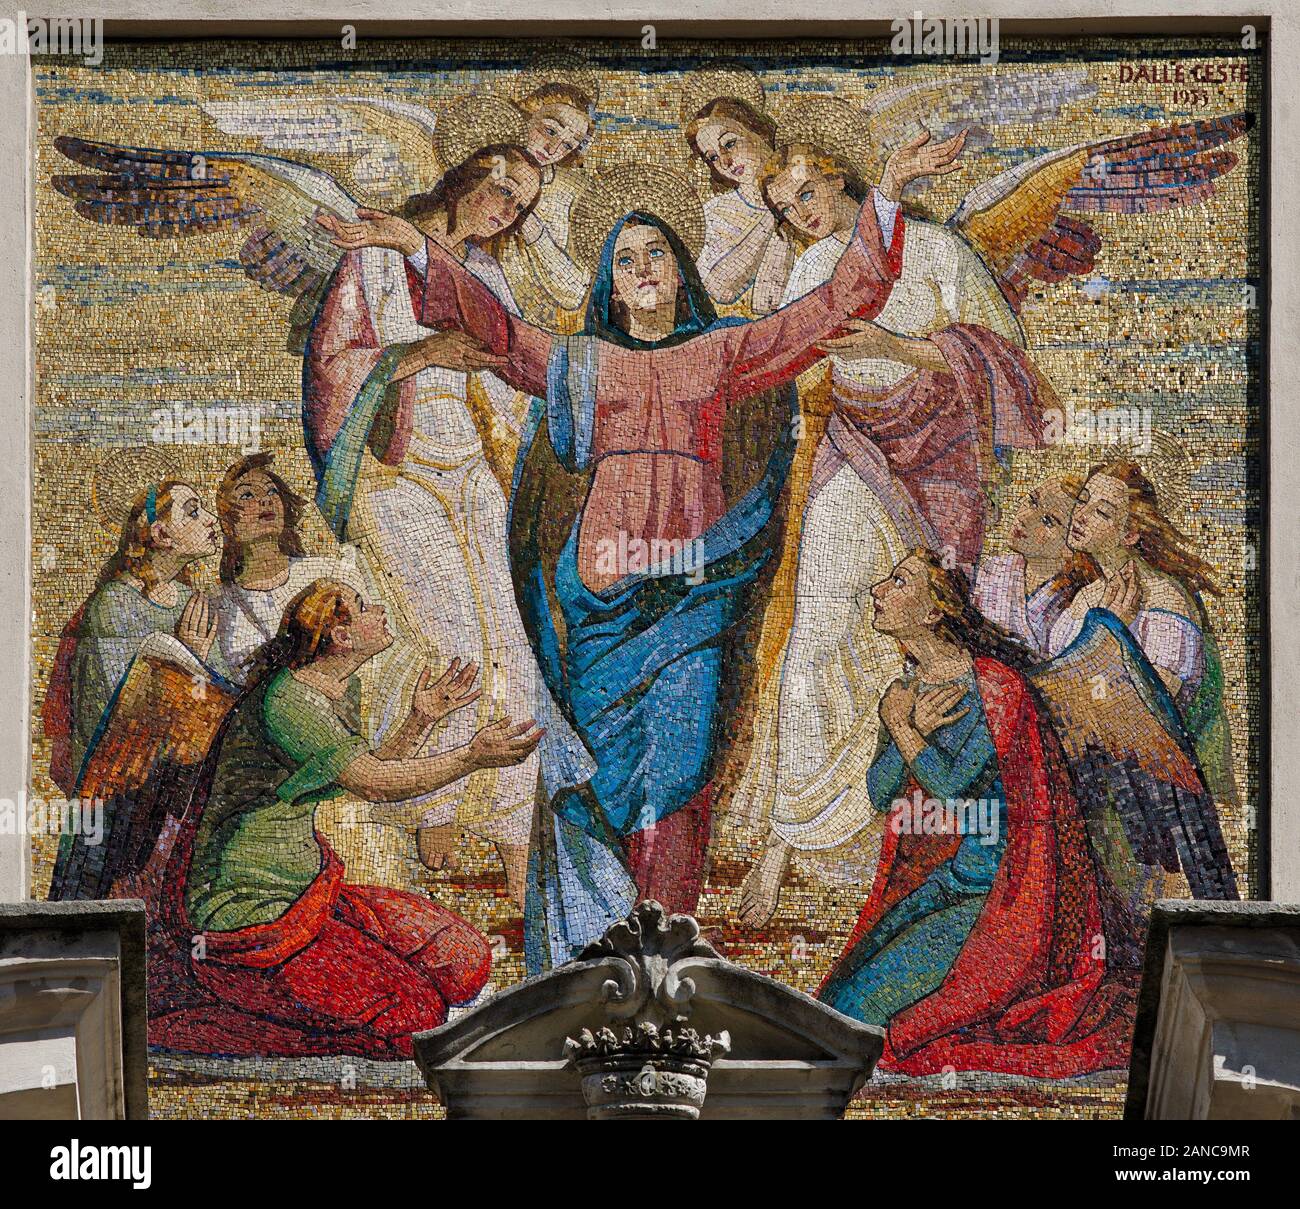 Mosaic depicting the assumption of the Beta Virgin Mary by Piero Dalle Ceste, 1953, at Sanctuary of Crea in Monferrato, Piedmont, Italy Stock Photo